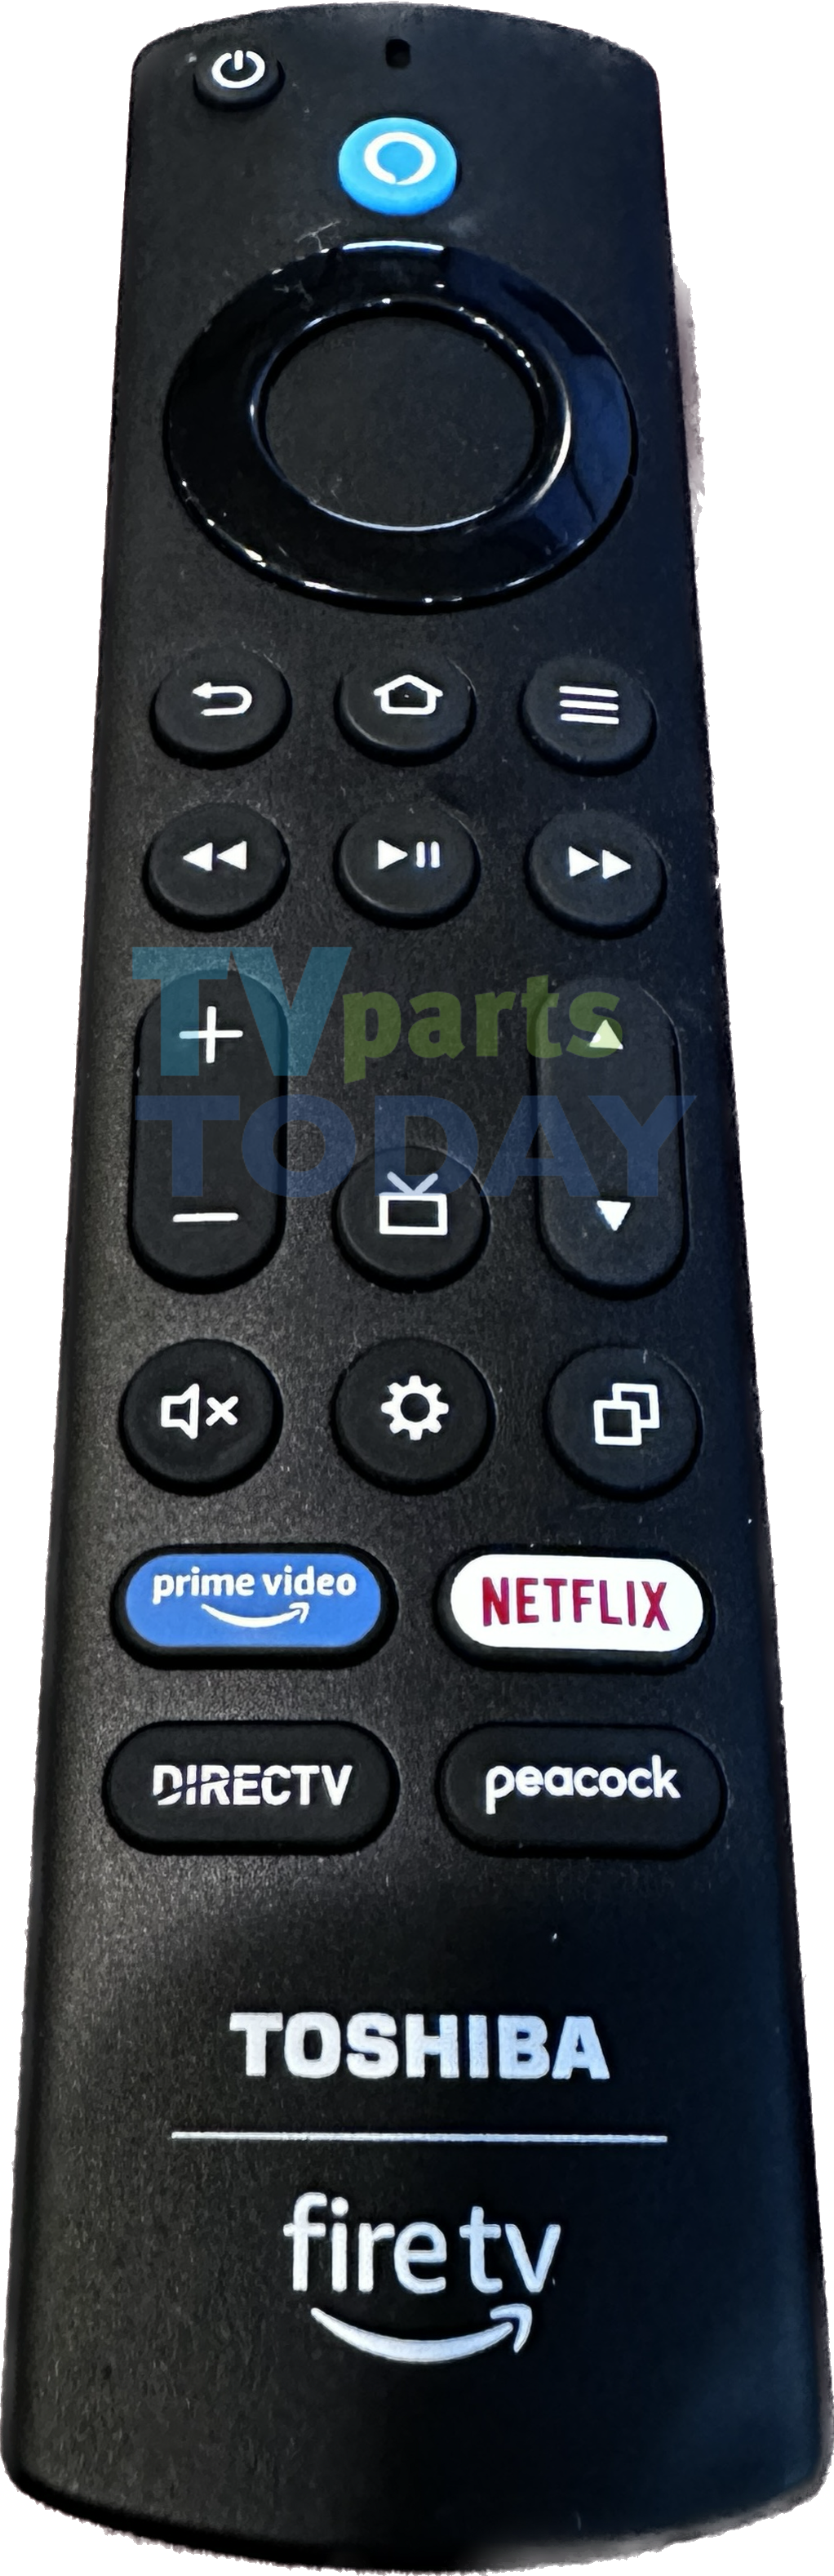 337282 Toshiba Fire TV Remote, DirectTv Button and Peacock button, G2P2BN00 65LF711U20 55LF711U20 50LF711U20 43LF711U20 49LF421U19 43LF421U19 32LF221U19 55LF621U19 50LF621U19 43LF621U19